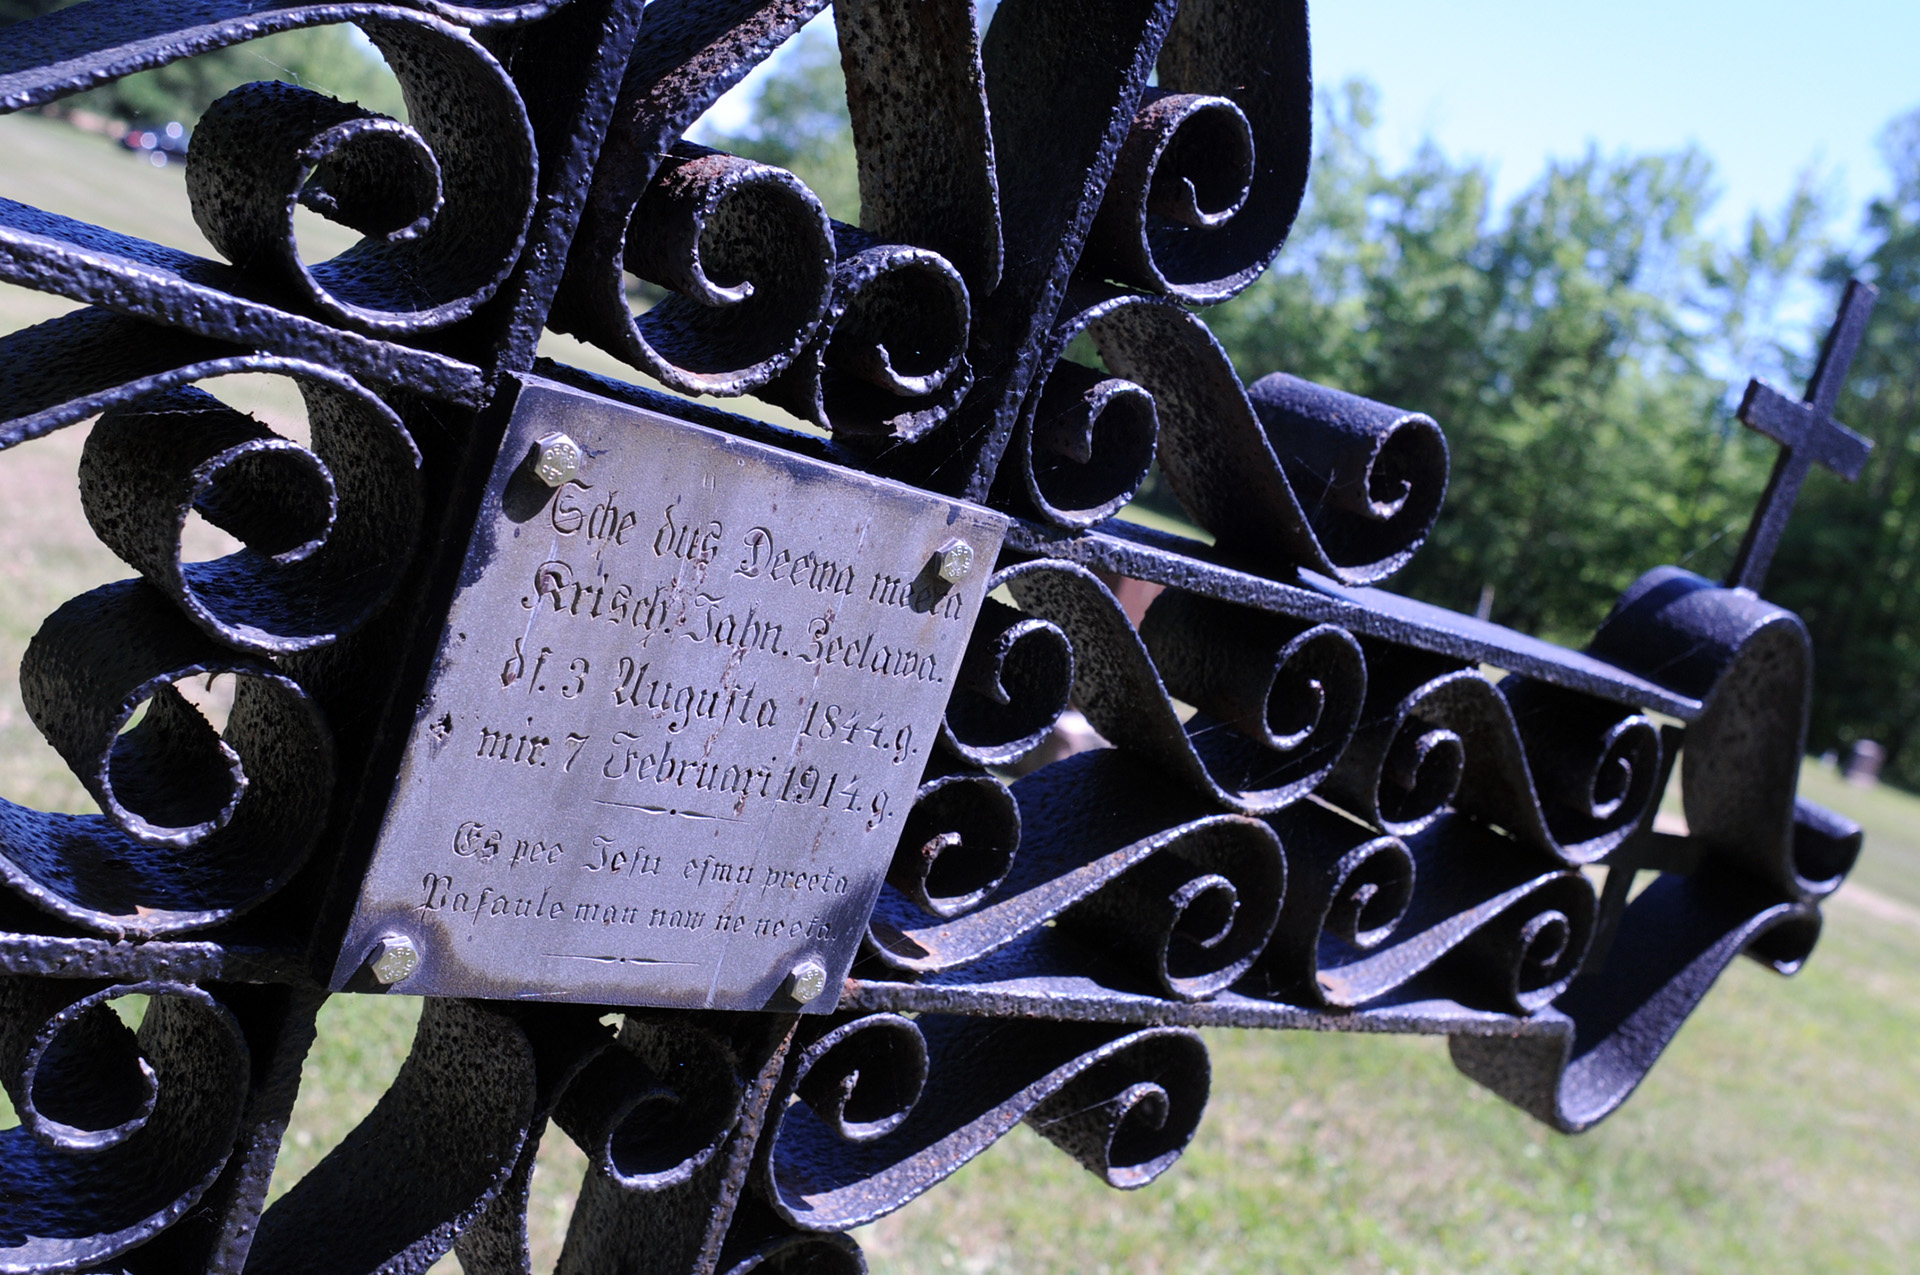 The grave marker for Krišjānis Jānis Cielava (1844-1914) is made of wrought iron and is unusual for the Latvian cemetery in Lincoln County.